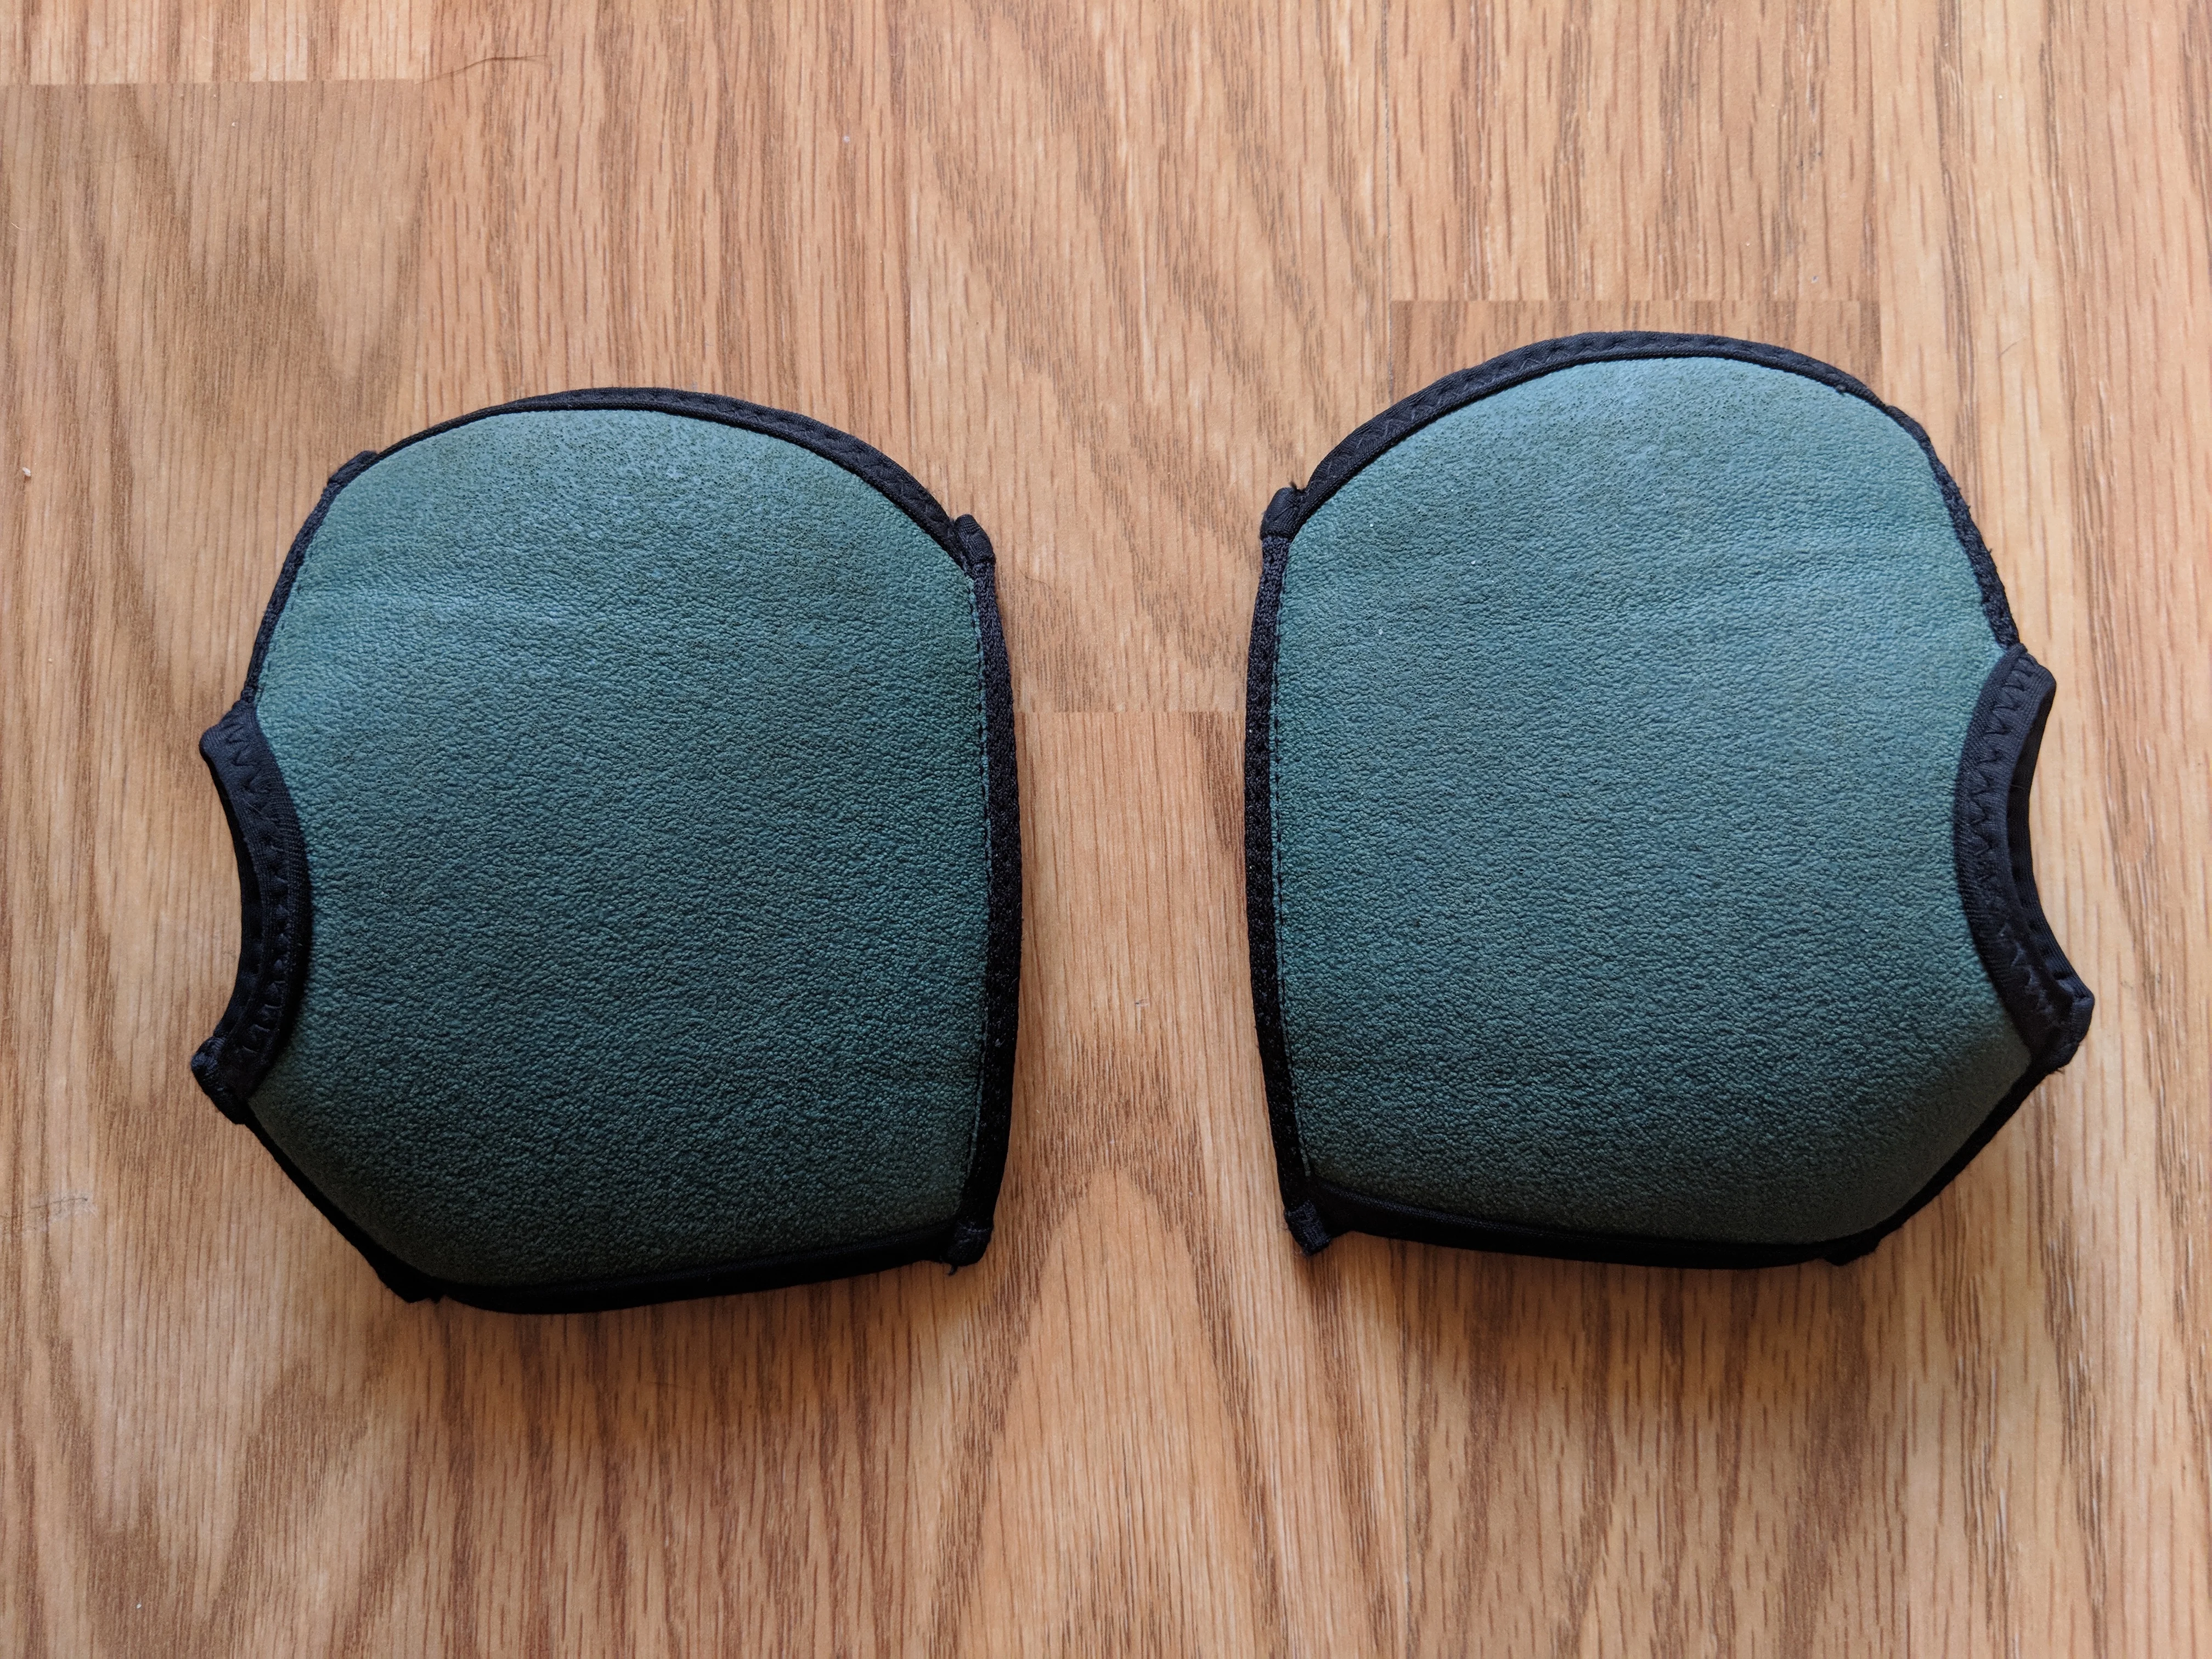 Yoga Paws Review - Wearable Hand Pads (bottom)